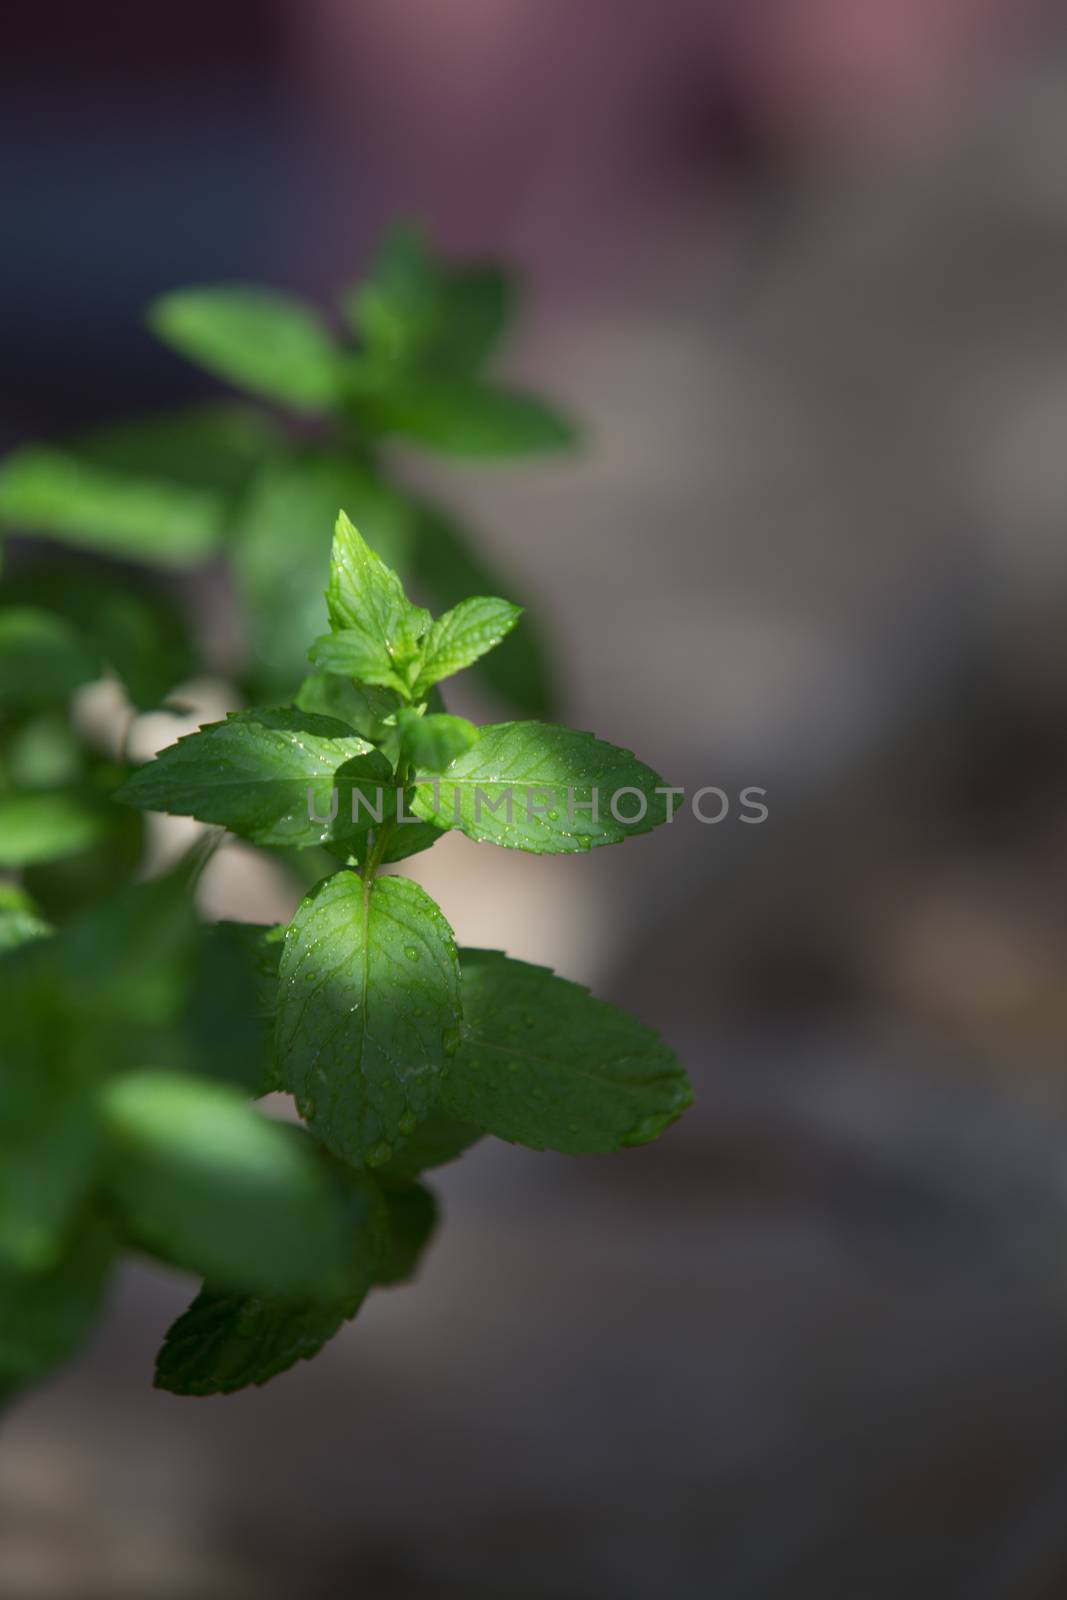 Mint plants photographed in the morning light in selective focus with dew drops on the leaves by robbyfontanesi